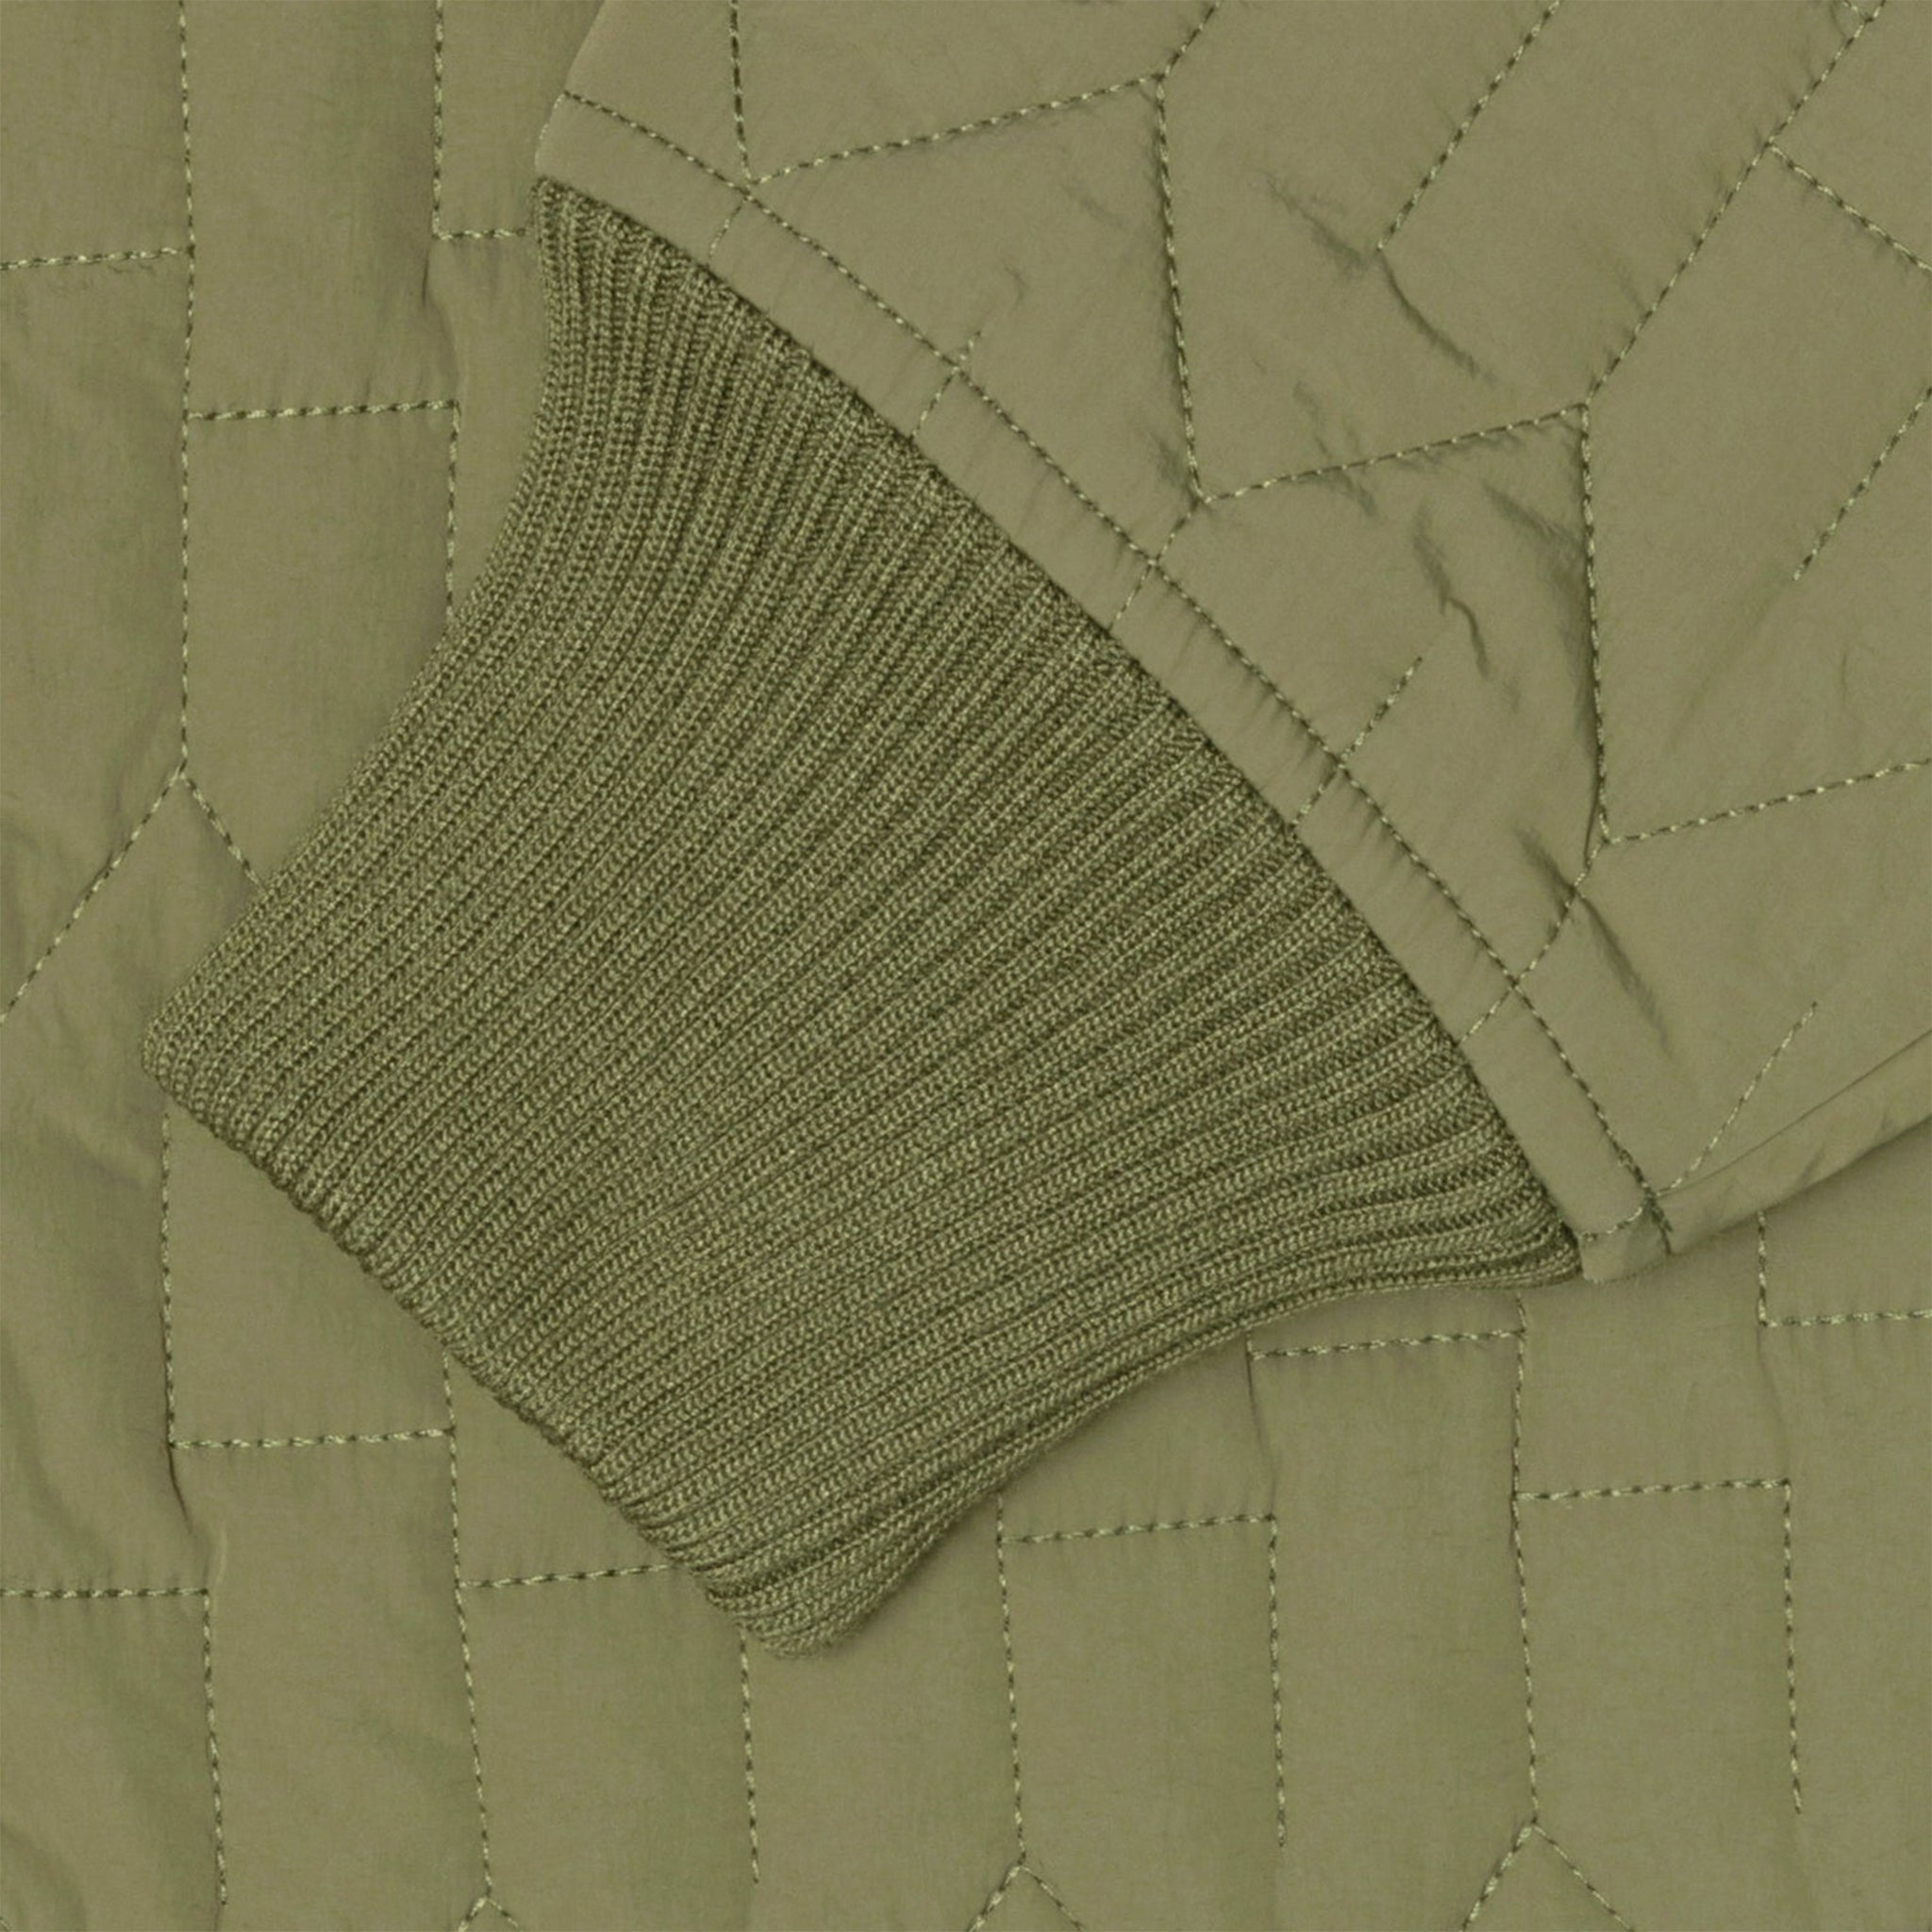 S QUILTED LINER JACKET